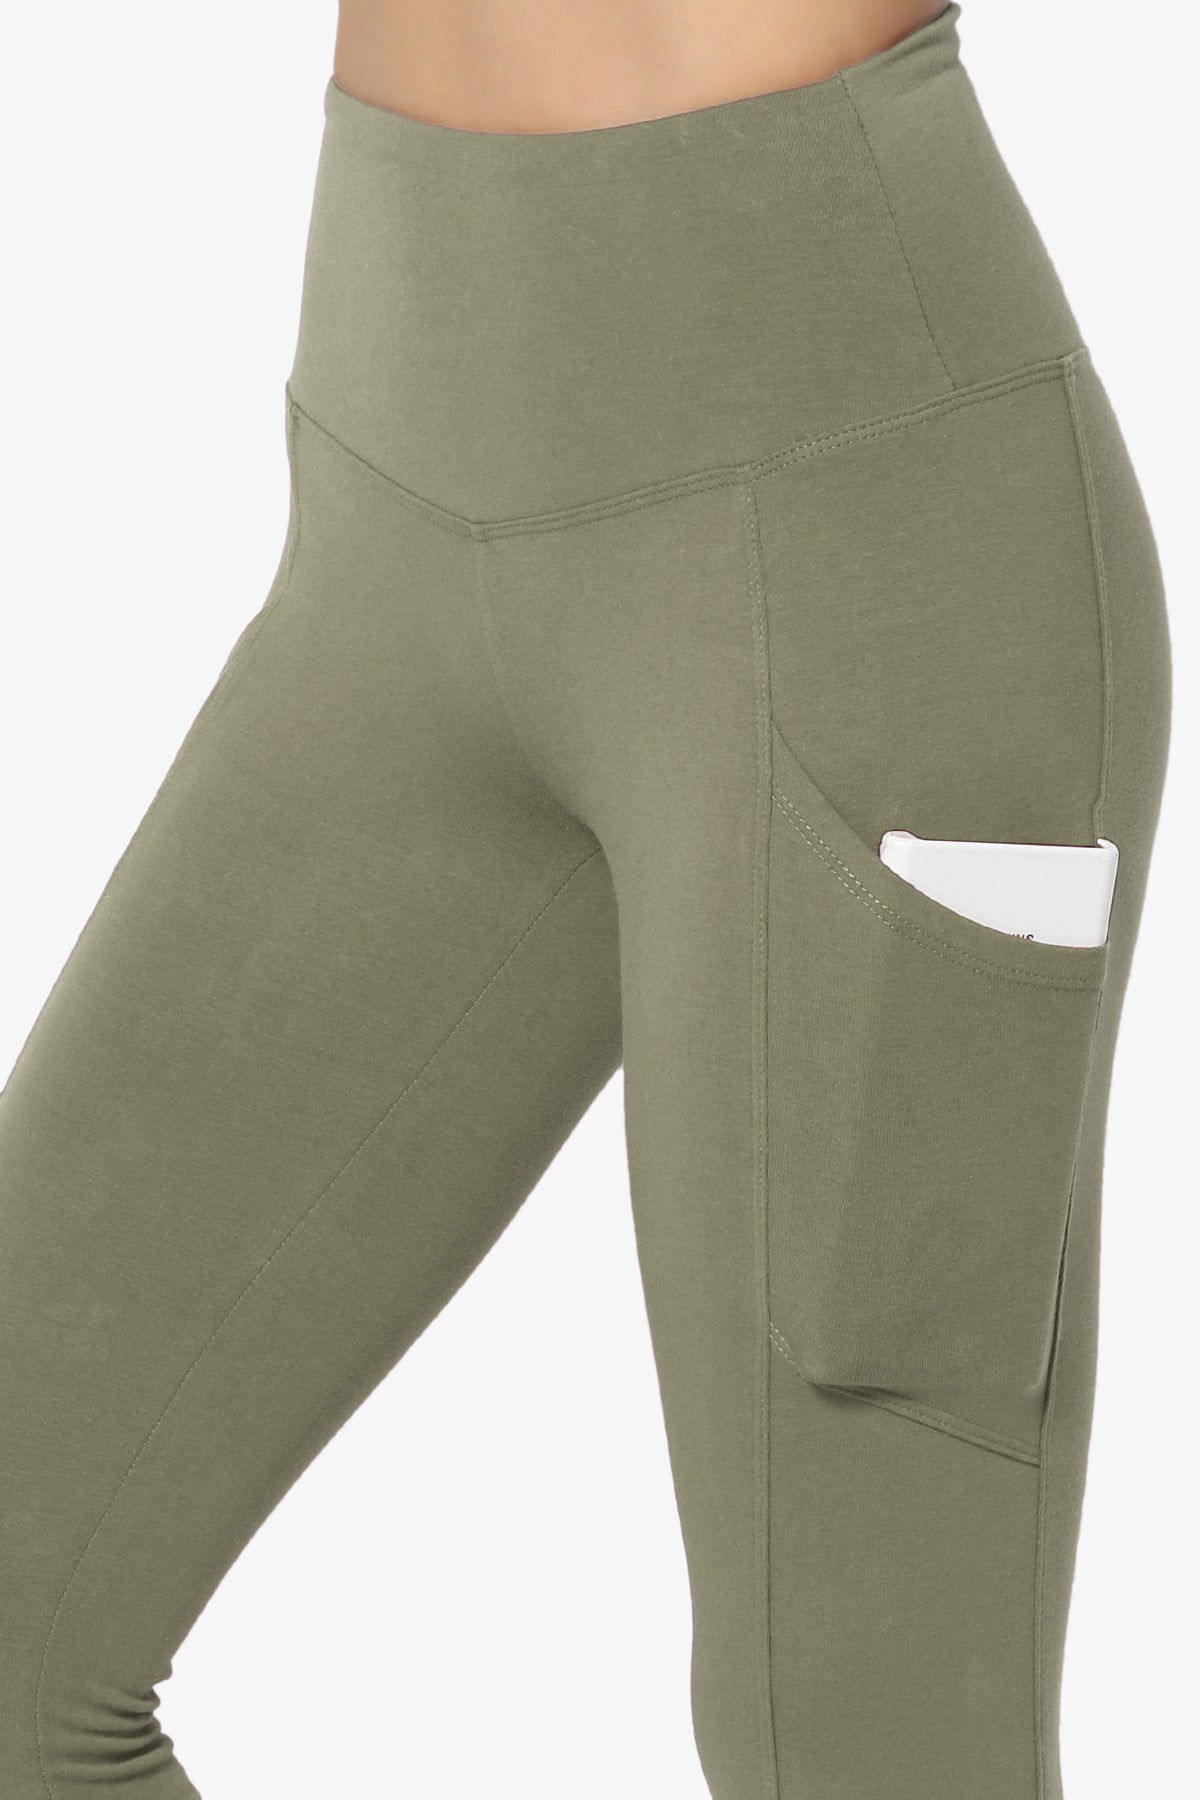 Load image into Gallery viewer, Ansley Luxe Cotton Leggings with Pockets DUSTY OLIVE_5
